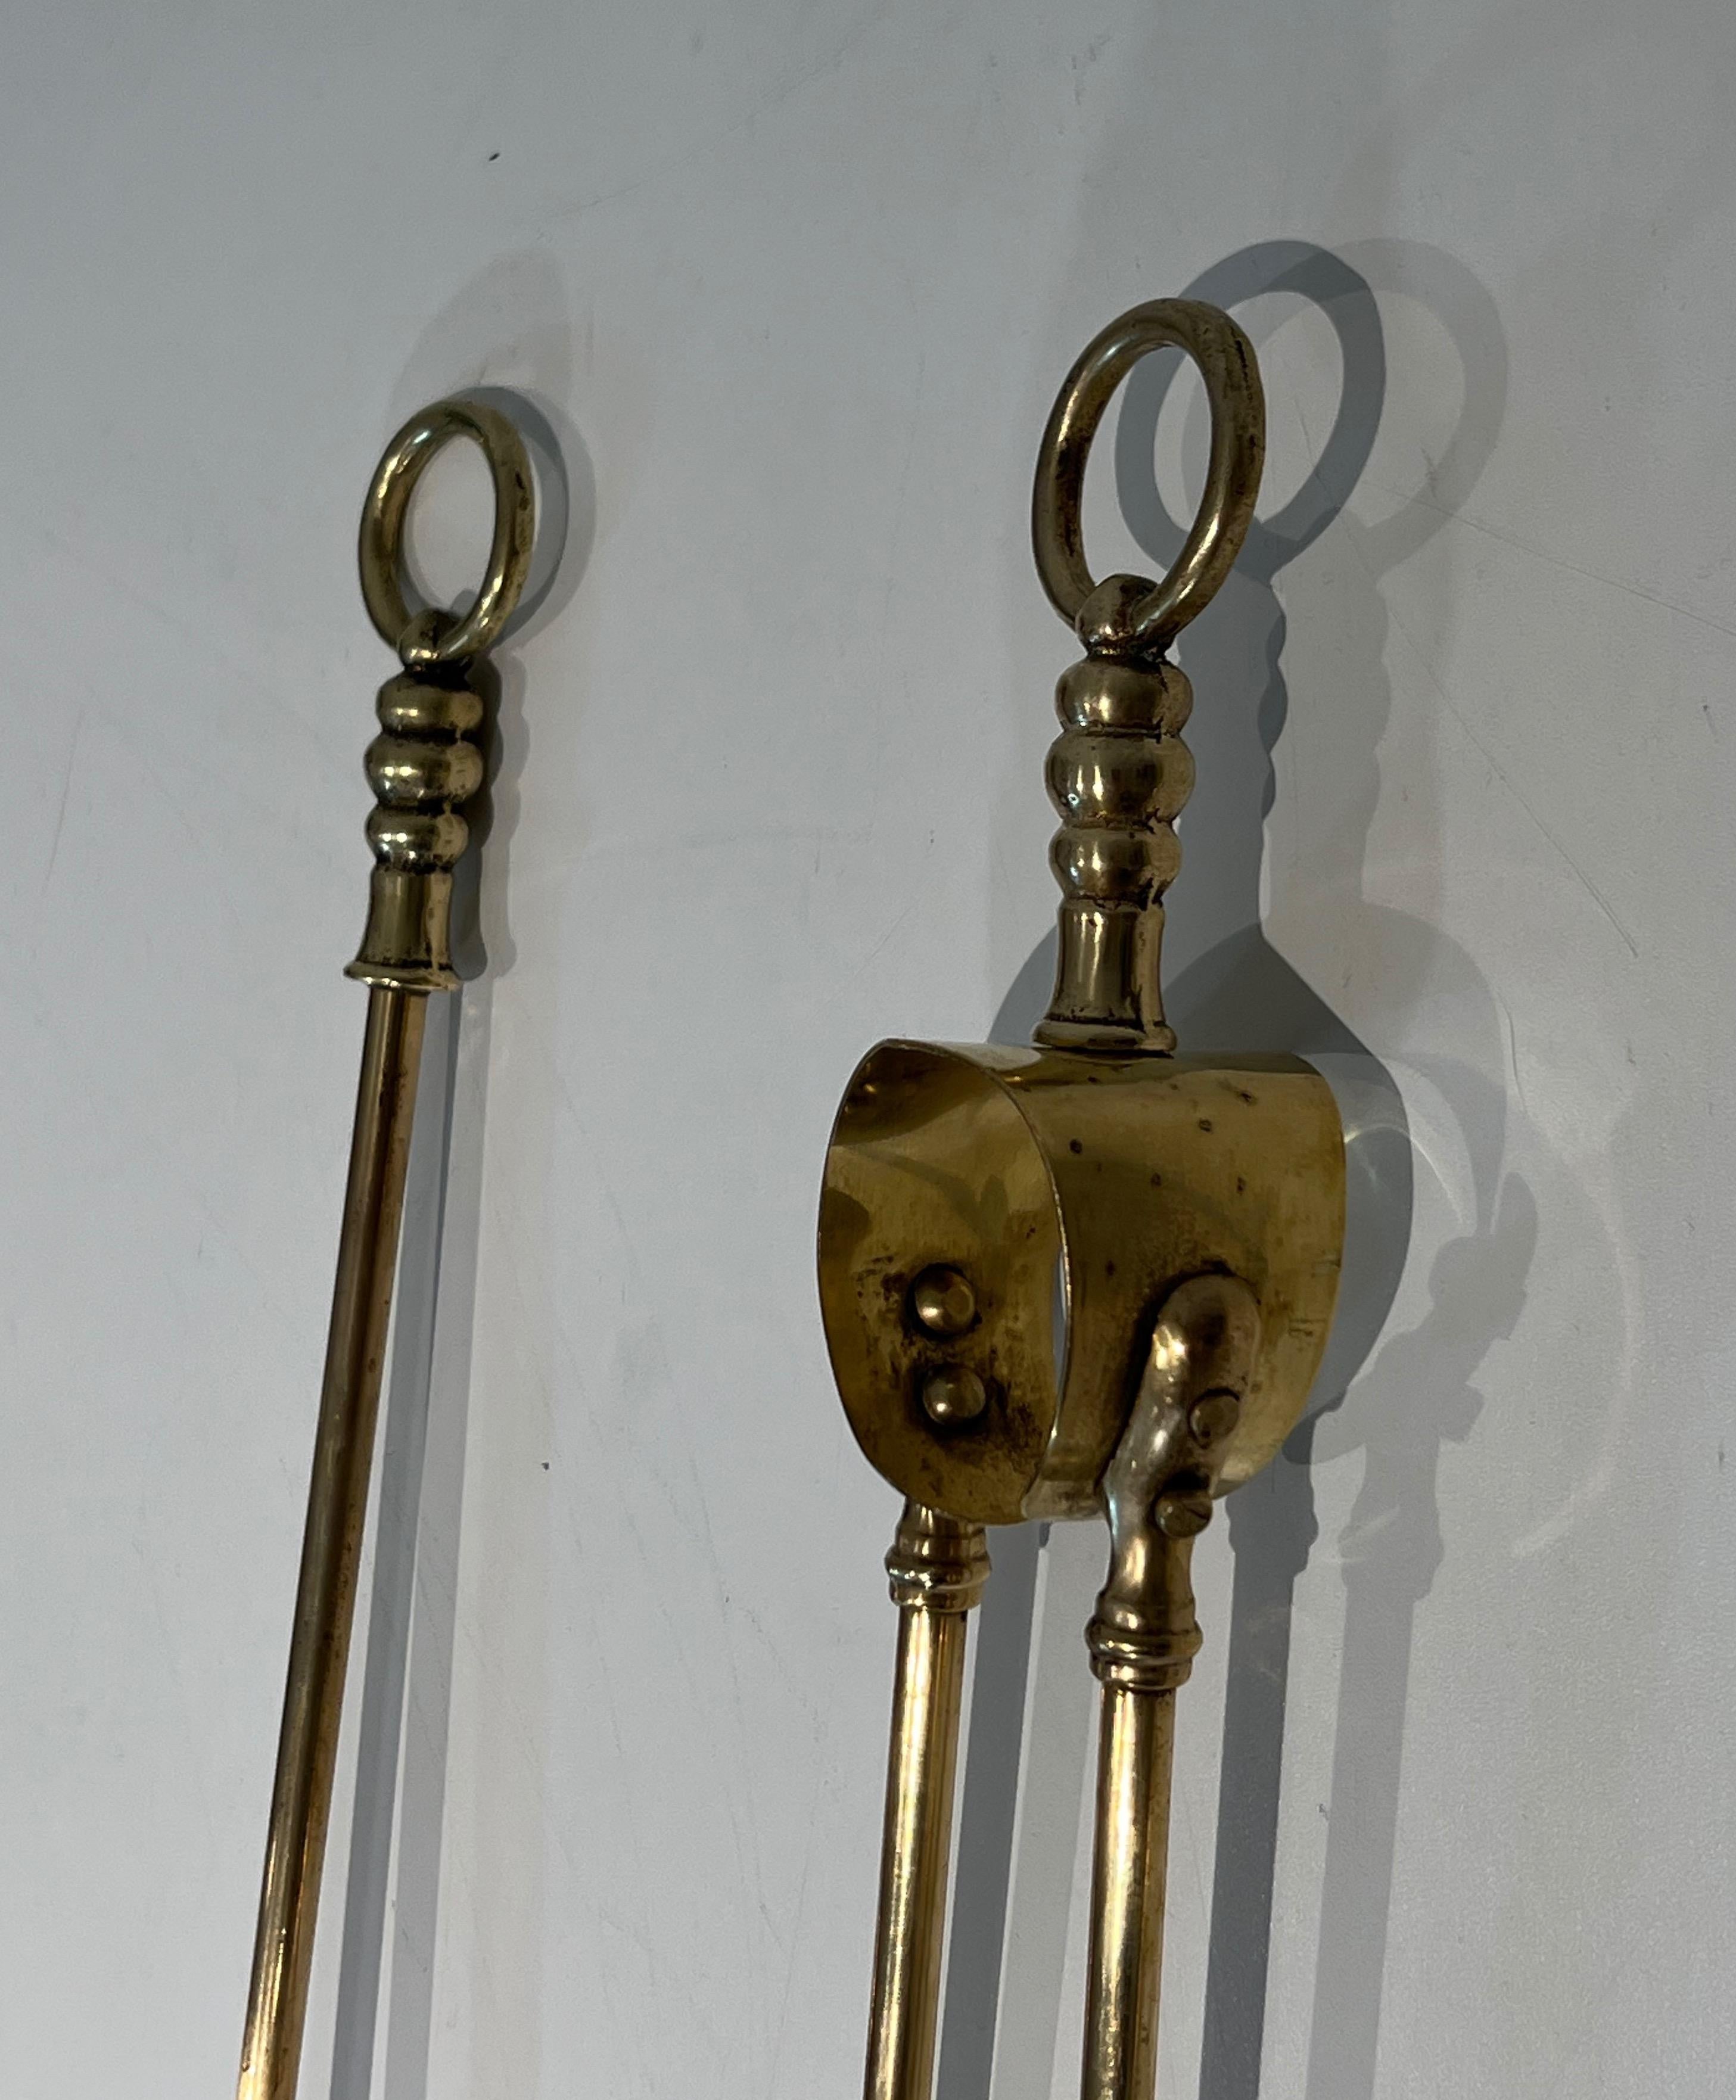 Rare Brass Fireplace Tools Surmounted by a Sculpture representing a Horse For Sale 3